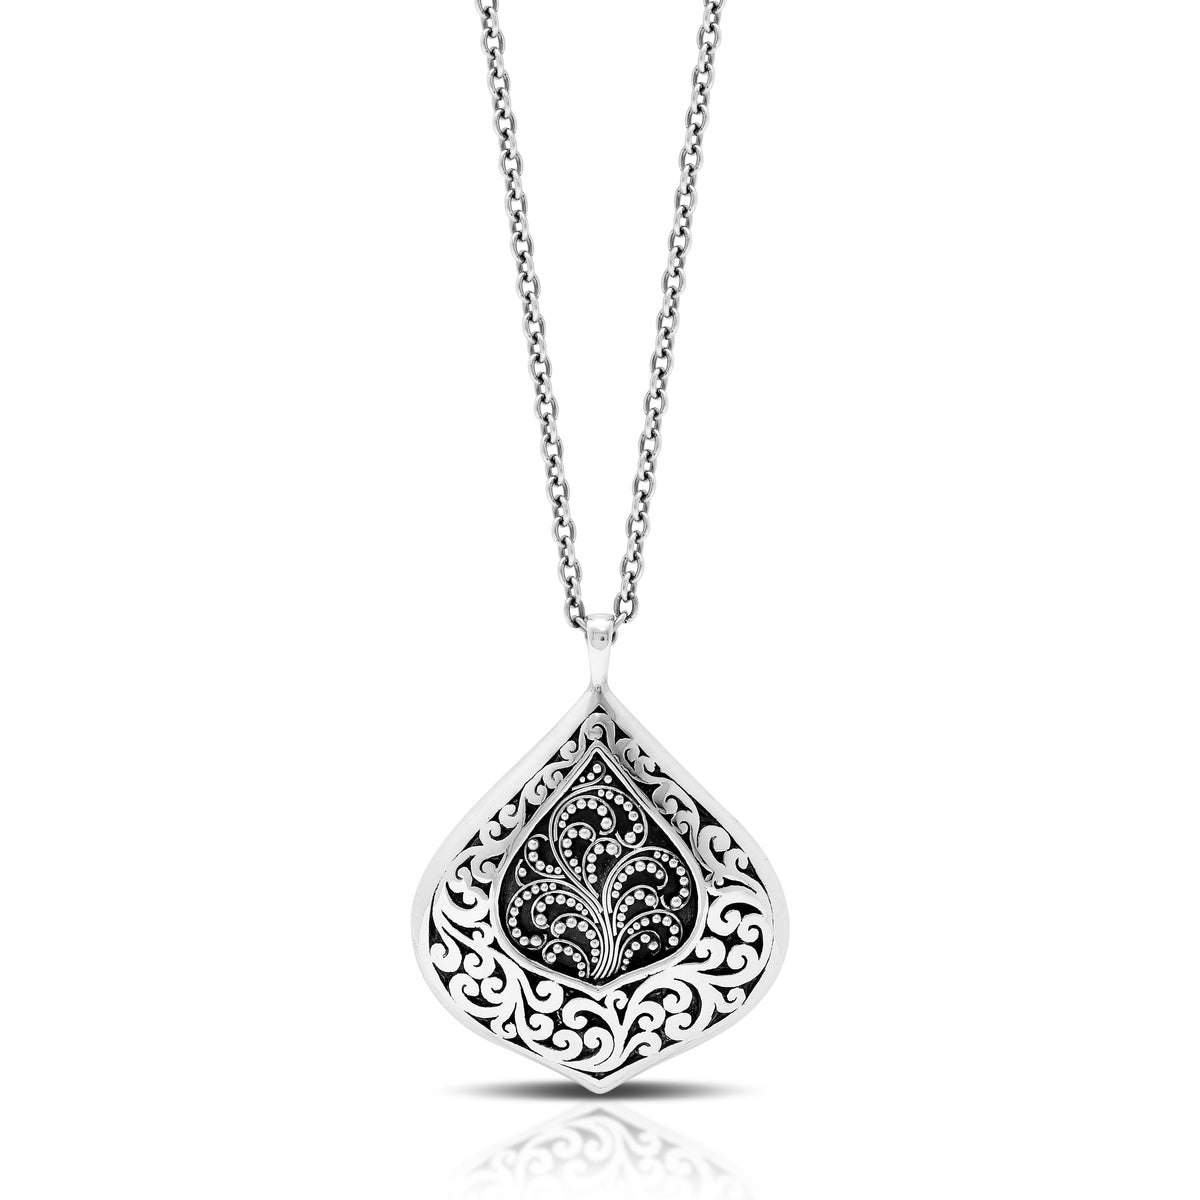 Classic Signature Scroll Granulated Large Leaf Shaped Drop Pendant Necklace. Pendant 35mm x 45mm  18" chain